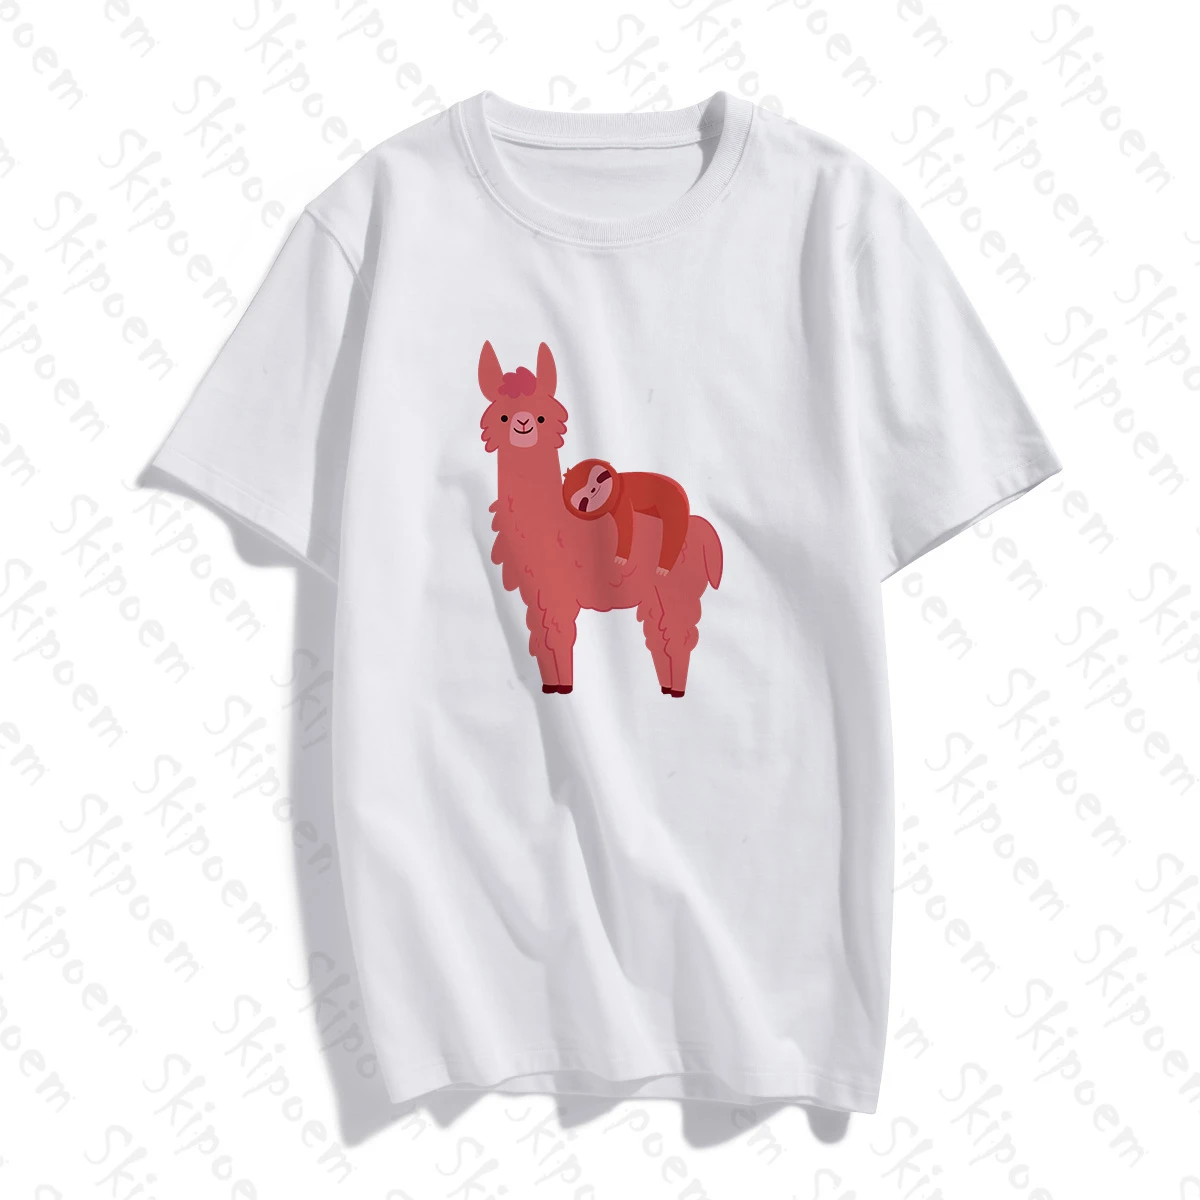 

Adorable Sloth Relaxing On A Llama T-shirt Women Aesthetic Tumblr Gothic Punk Cotton Short Sleeve Plus Size Top Tees Streetwear